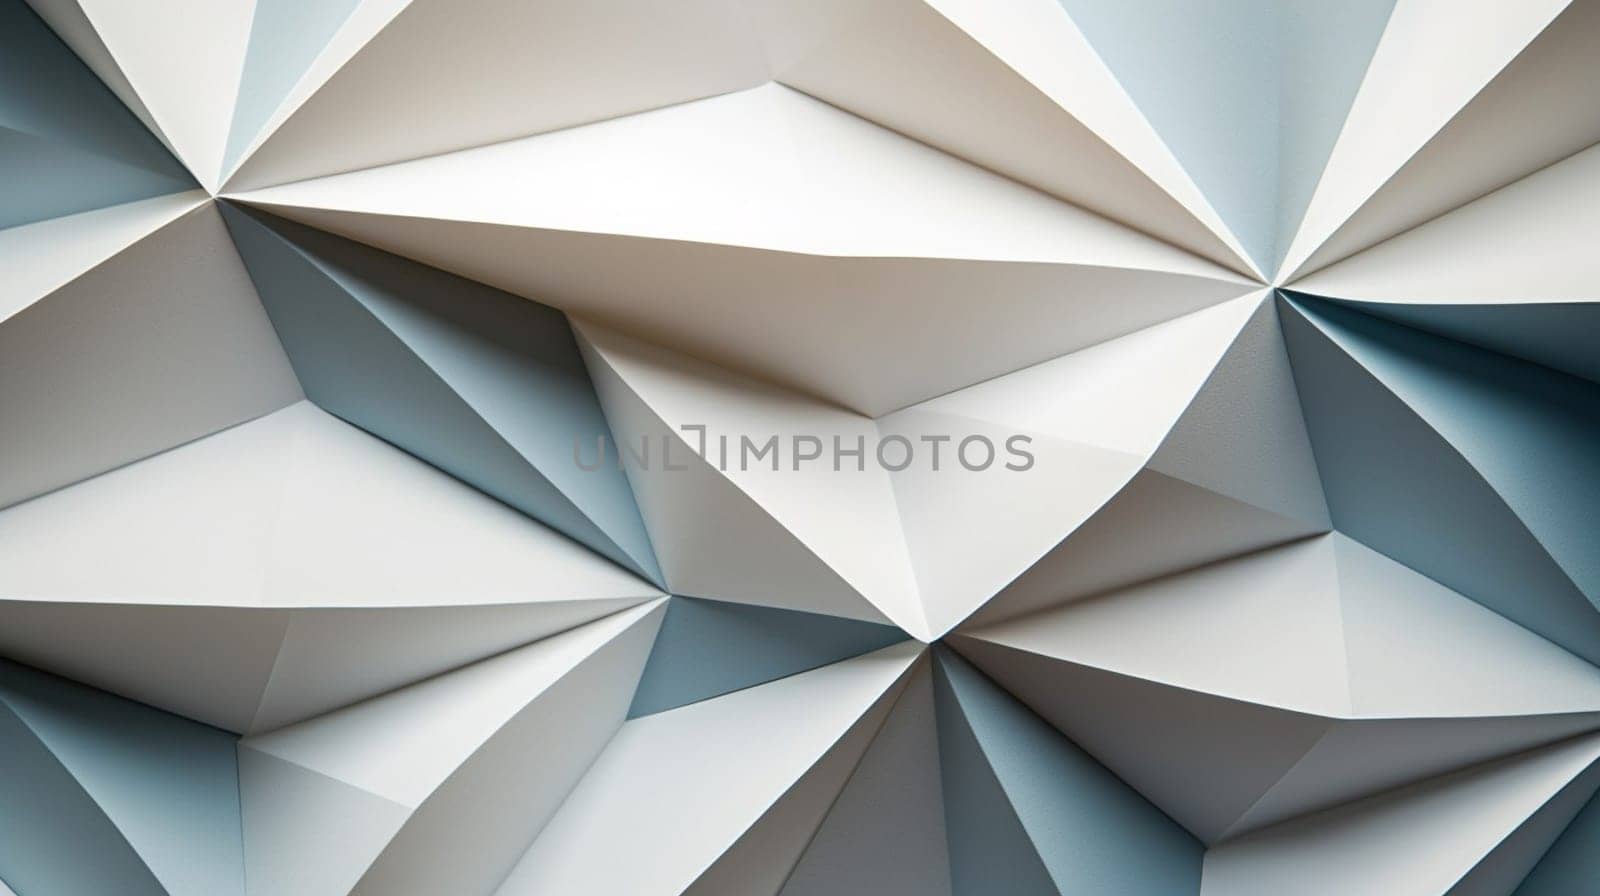 Paper abstract geometric pattern with blue and white shades creating a modern design. High quality photo